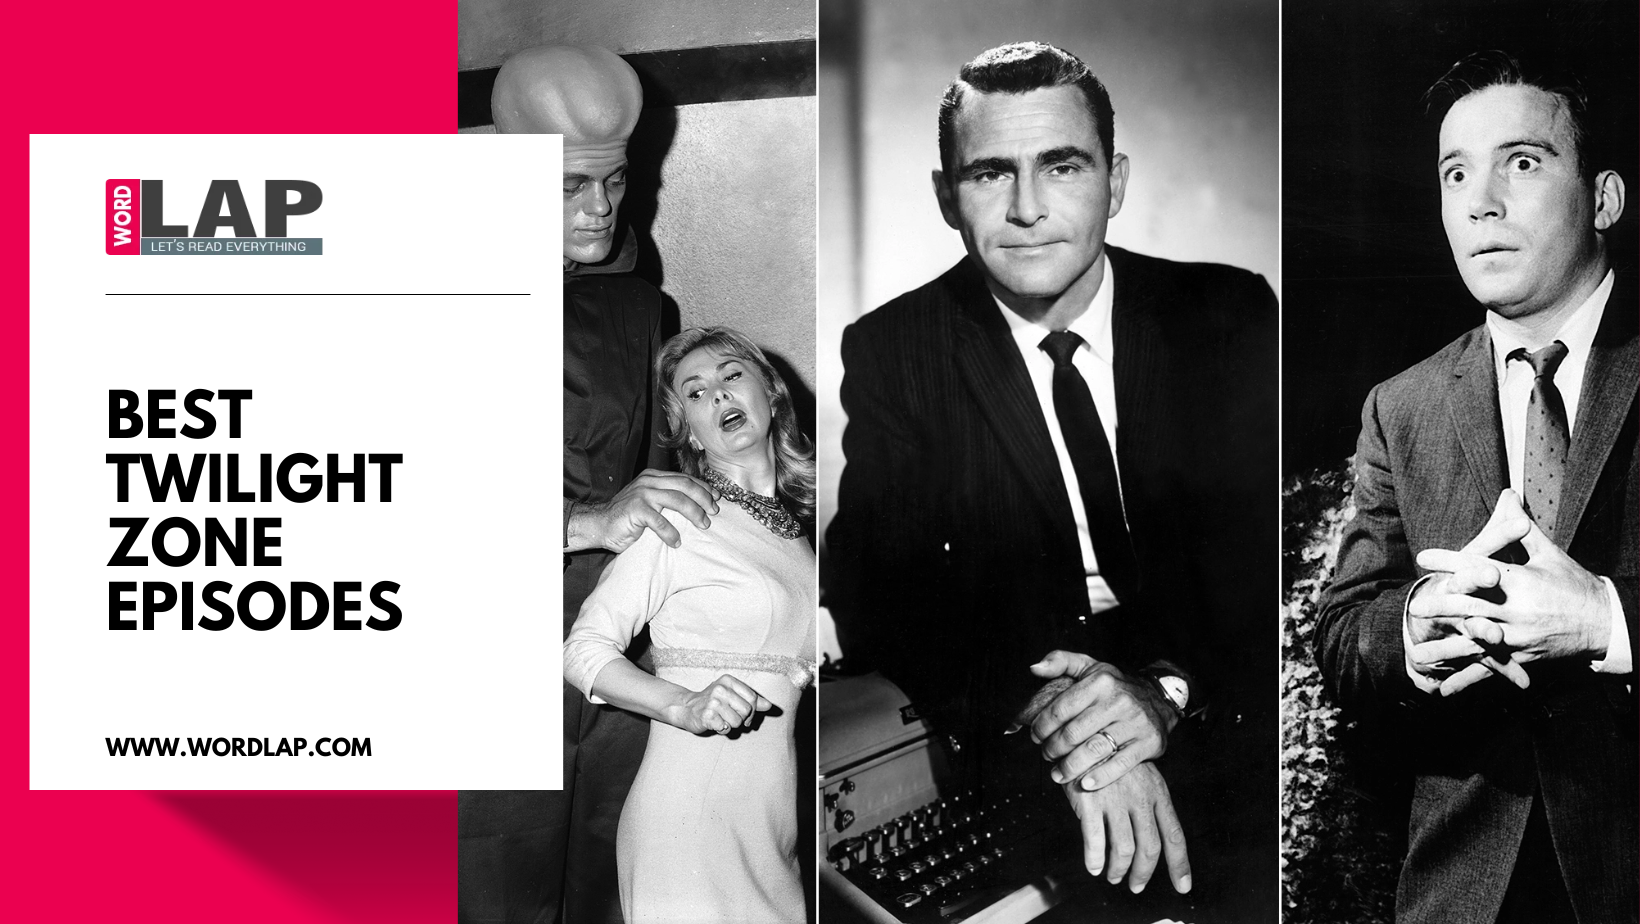 What Is The Scariest Episode Of The Twilight Zone?